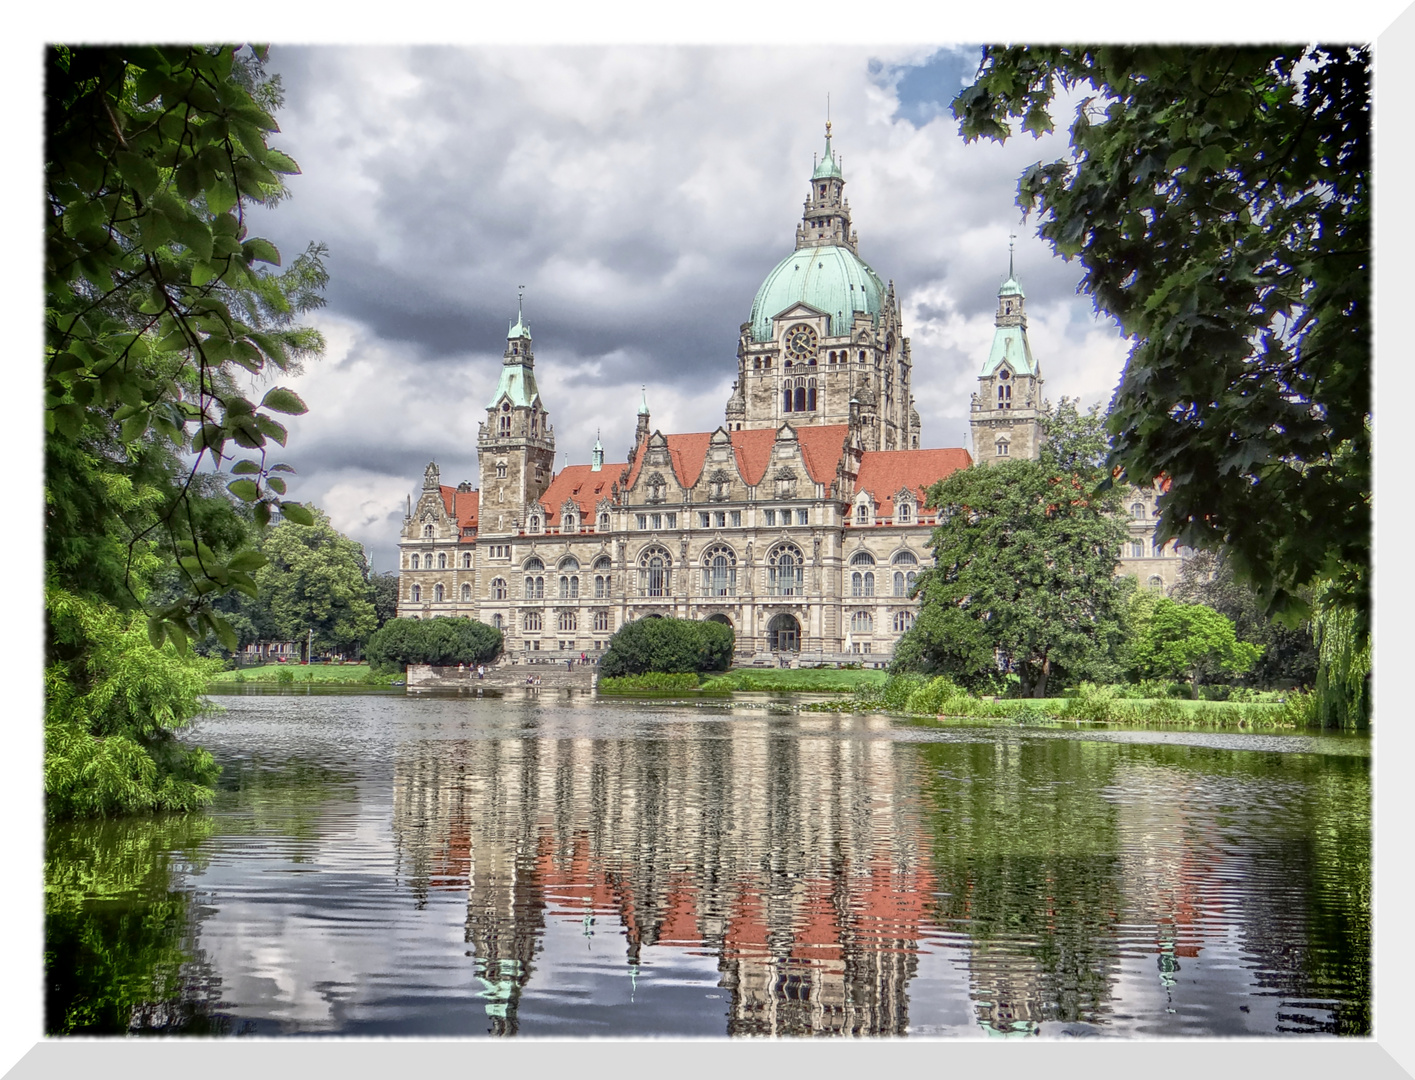 - Neues Rathaus Hannover_HDR -